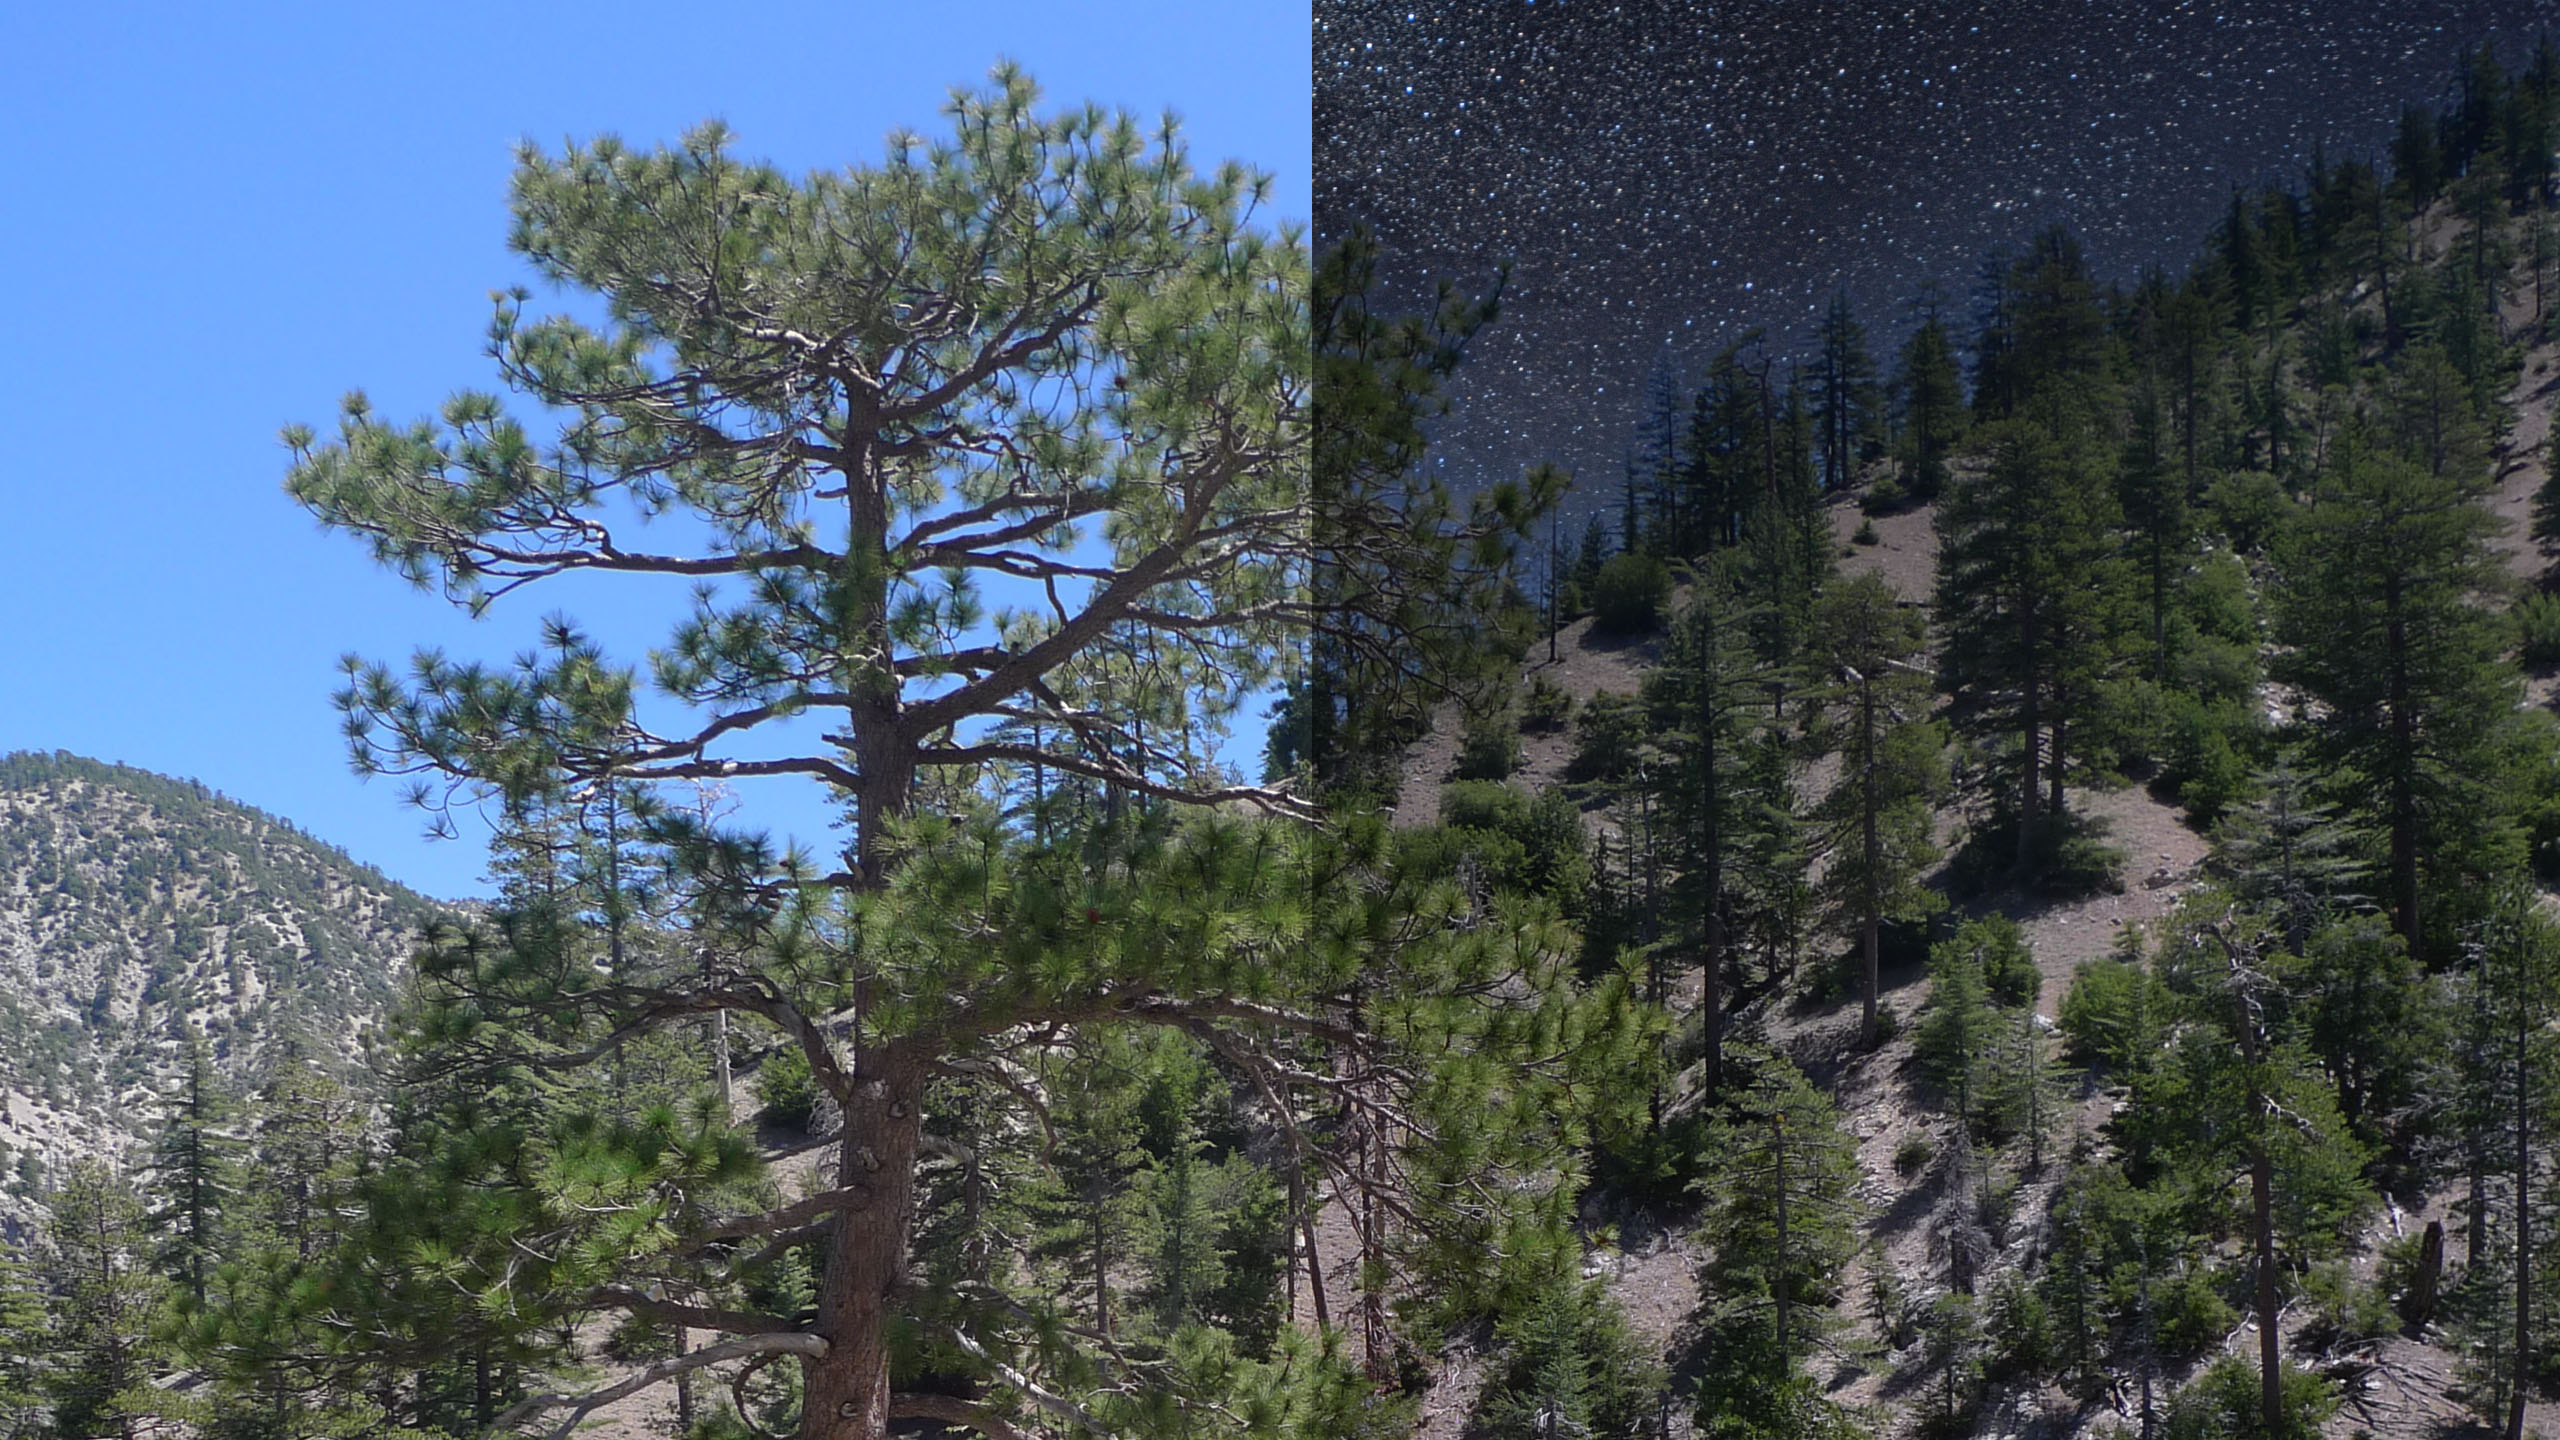 PHOTOFOCUS 2560x1440px sky replacement before and after